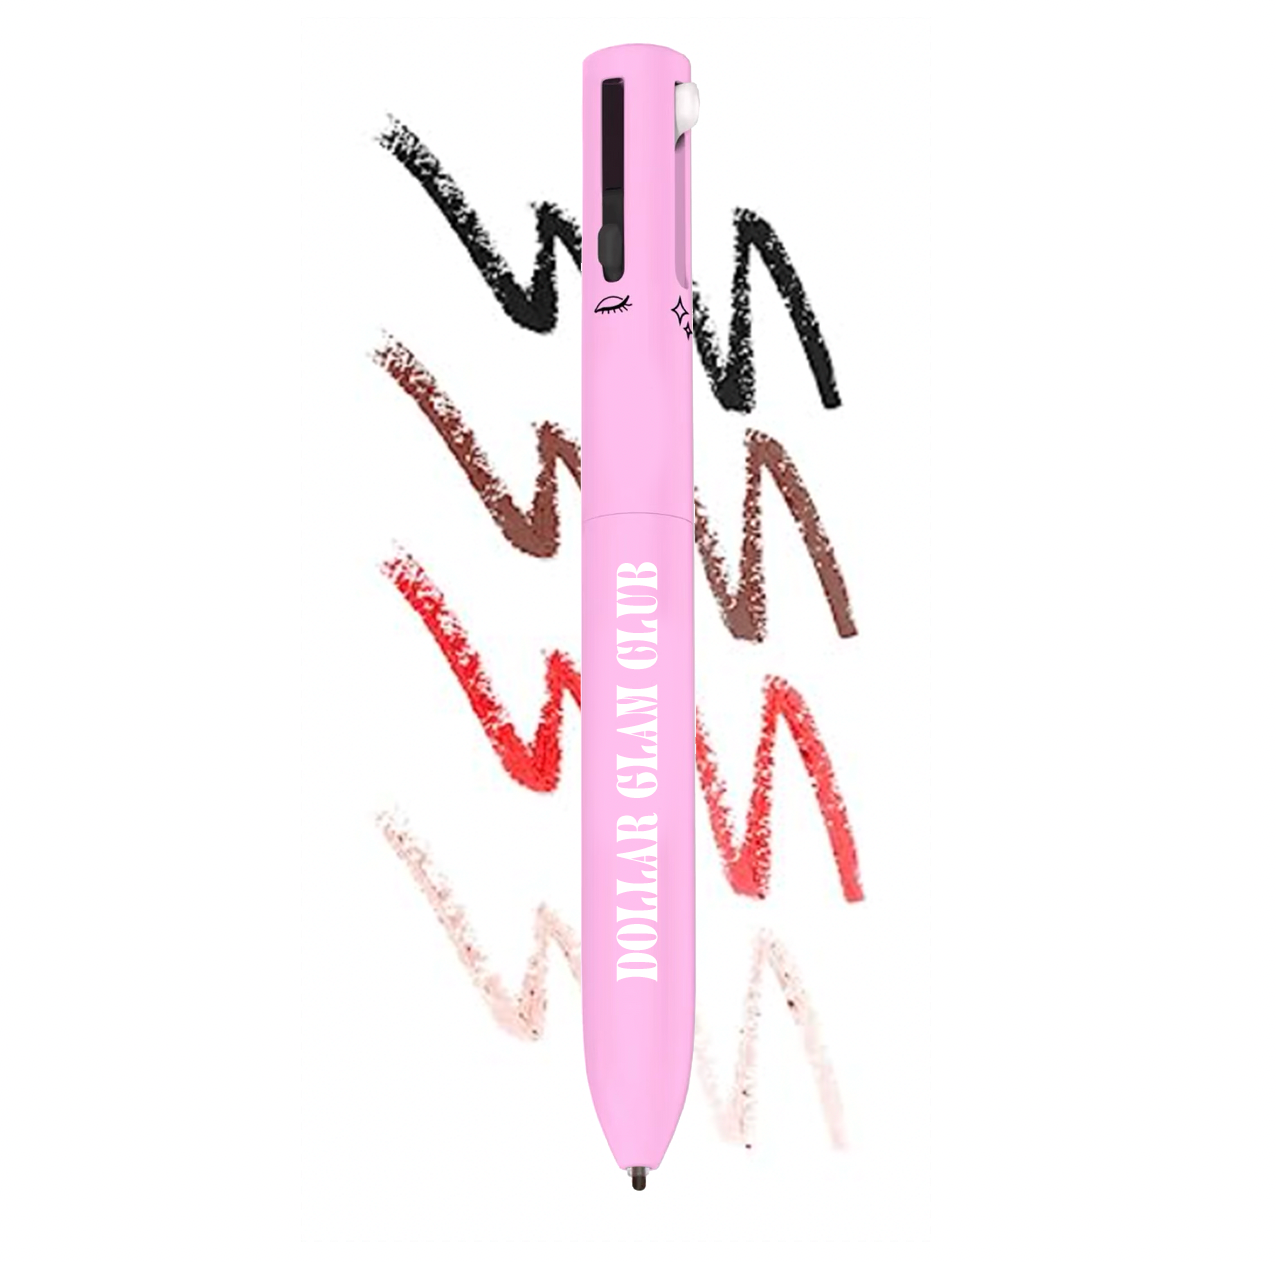 Touch Up 4-in-1 Makeup Pen